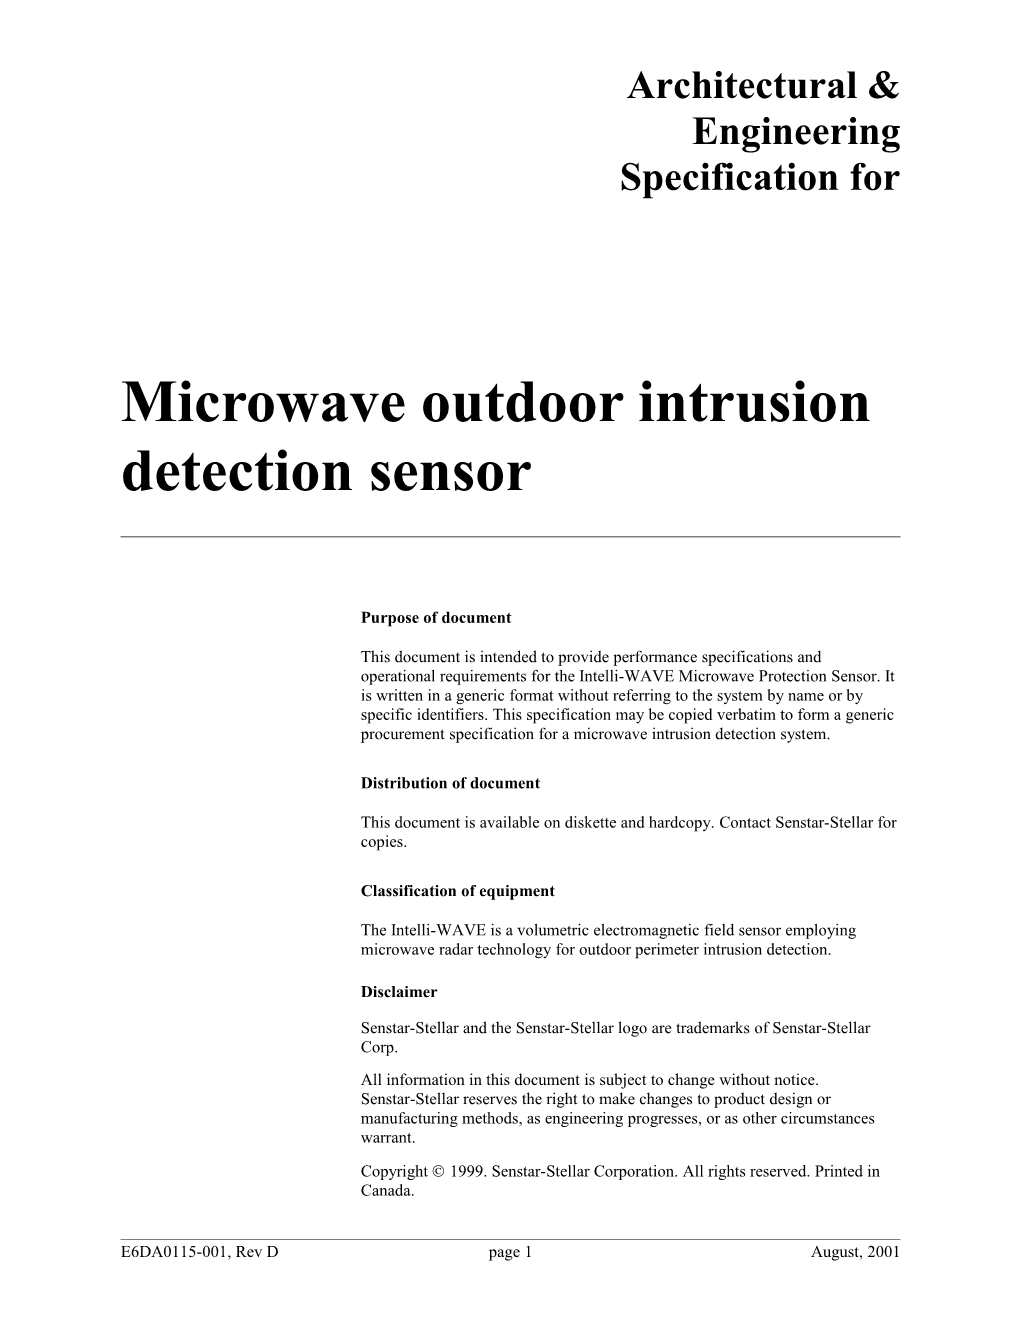 Buried Ported Coaxial Cable Outdoor Intrusion Detection System